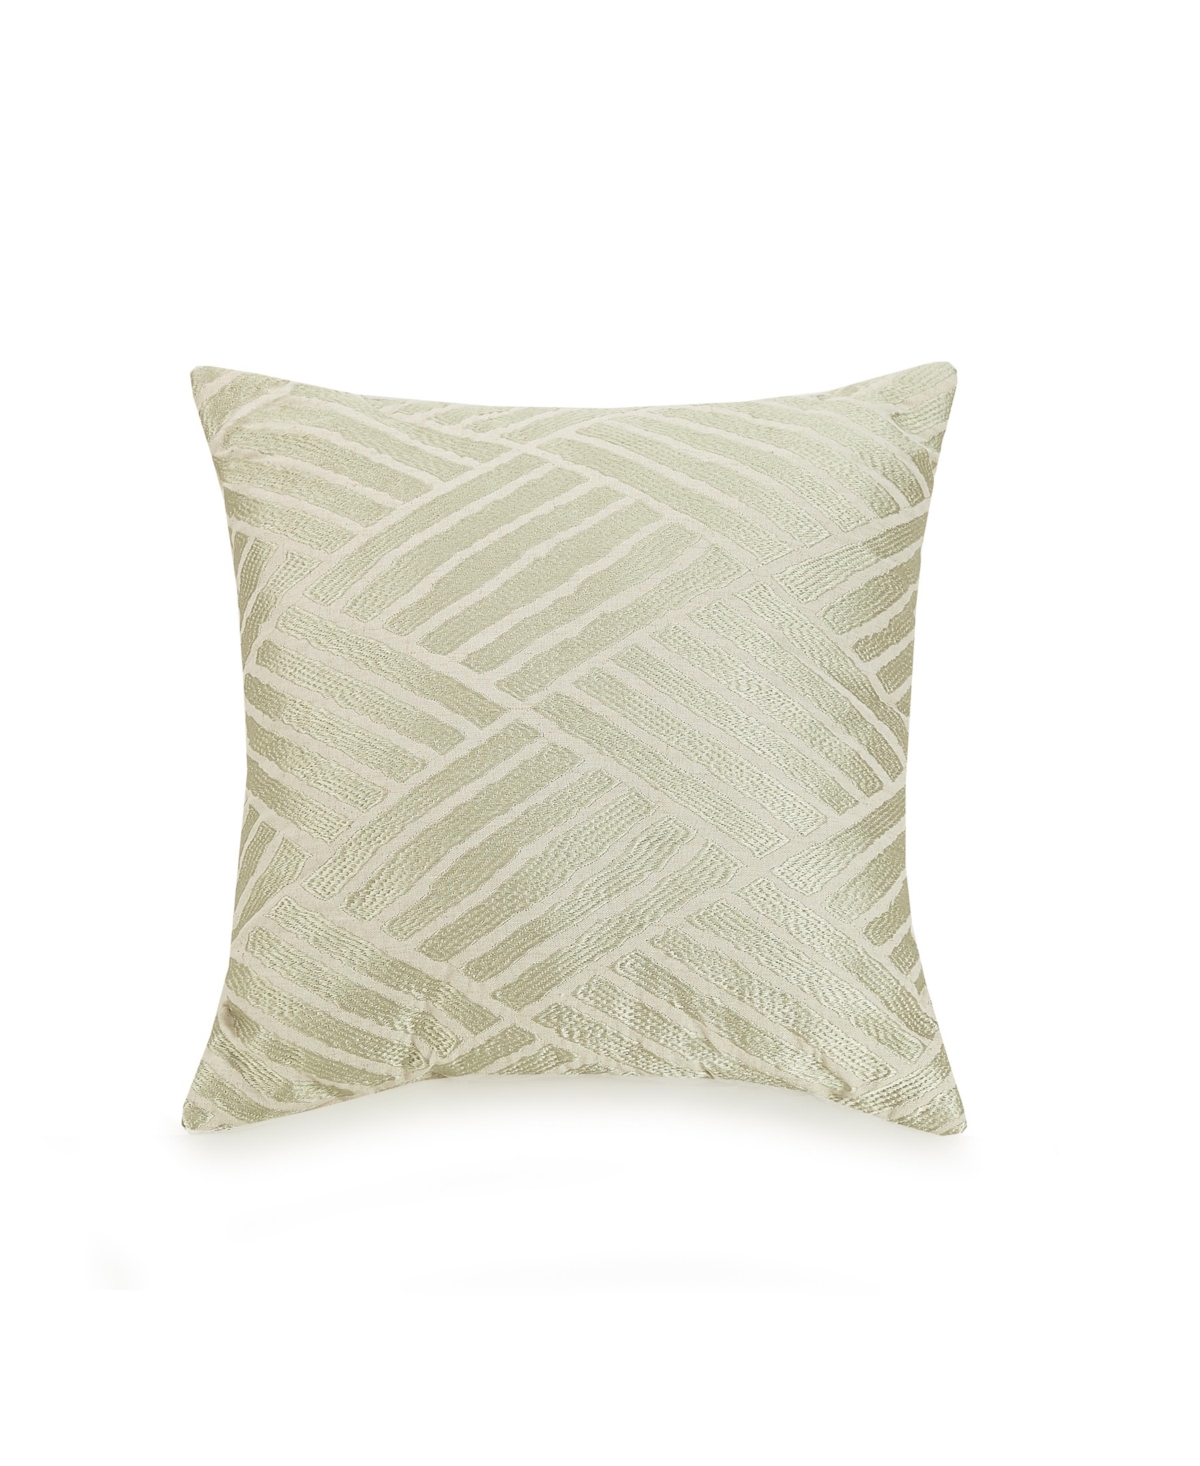 Ayesha Curry Embroidered Geo 18 Square Decorative Pillow Bedding